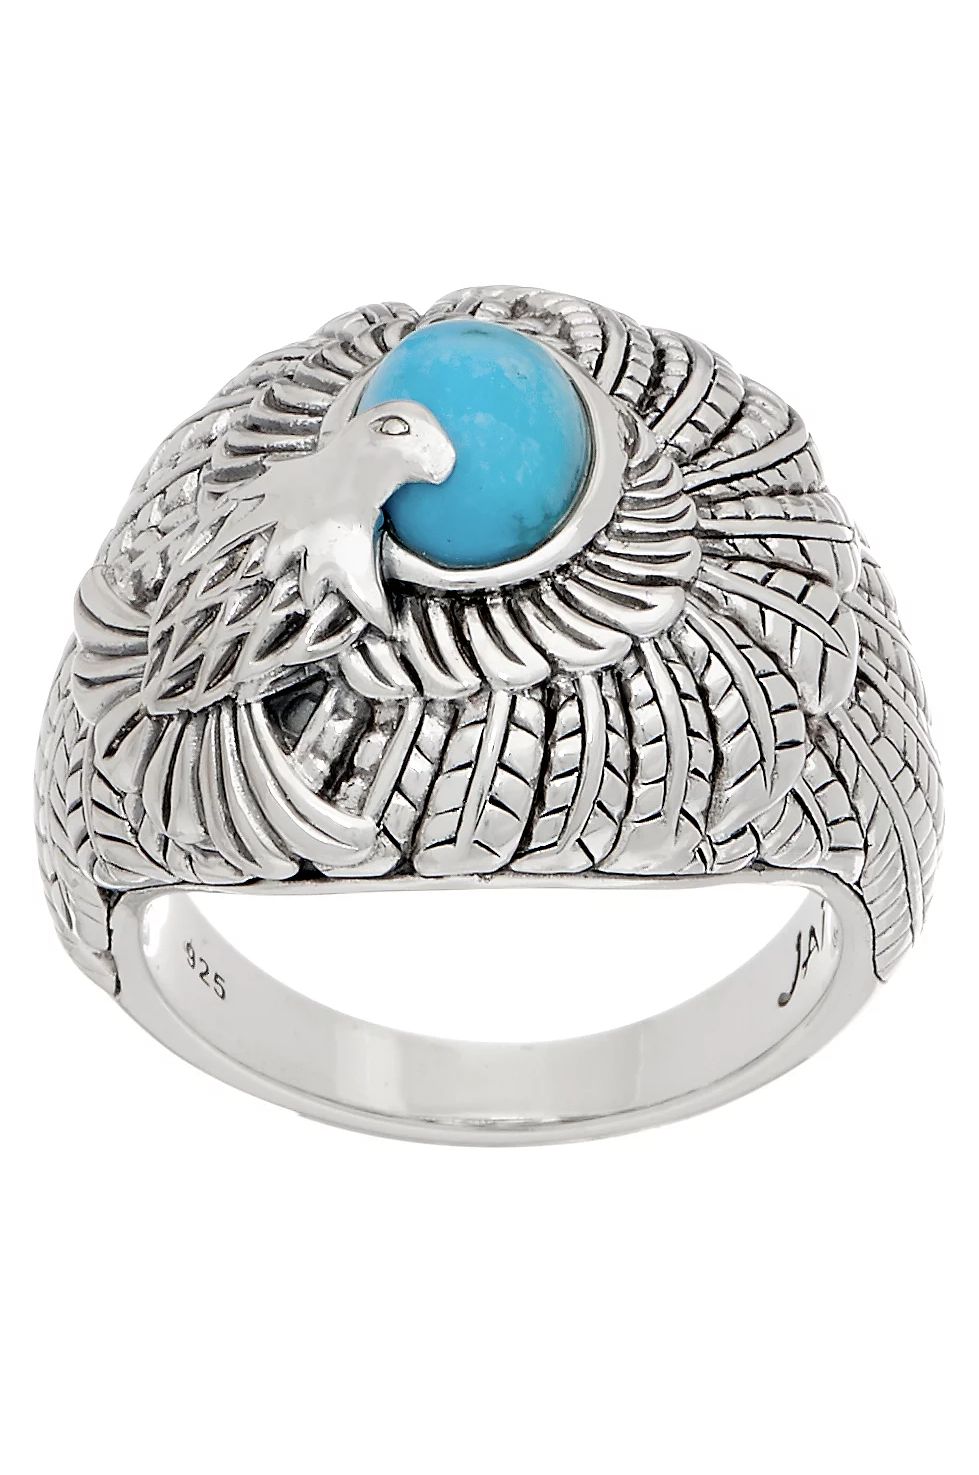 JAI Sterling Silver & Turquoise Born to Soar Eagle Ring Size 6